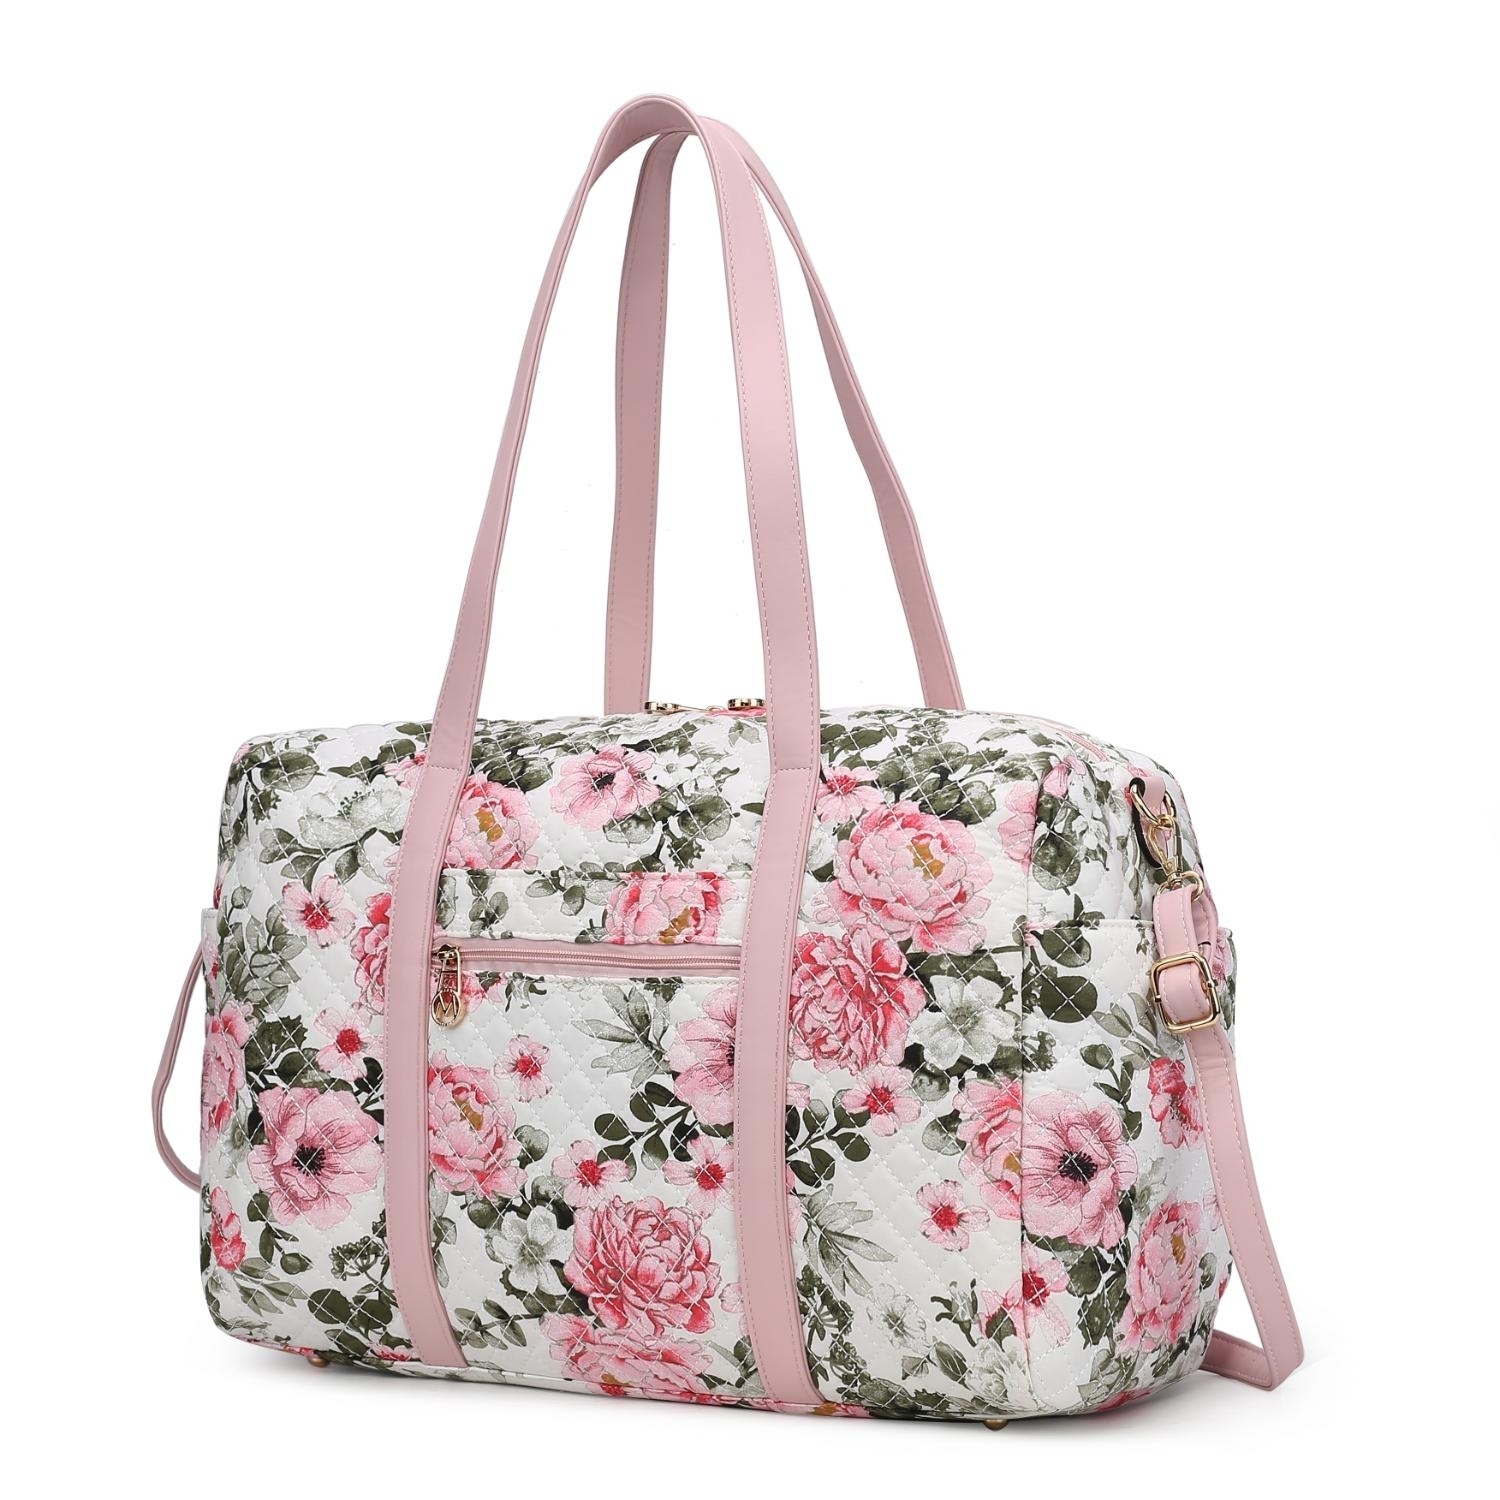 MKF Collection Khelani Quilted Cotton Botanical Pattern Women's Duffle Bag By Mia K - White